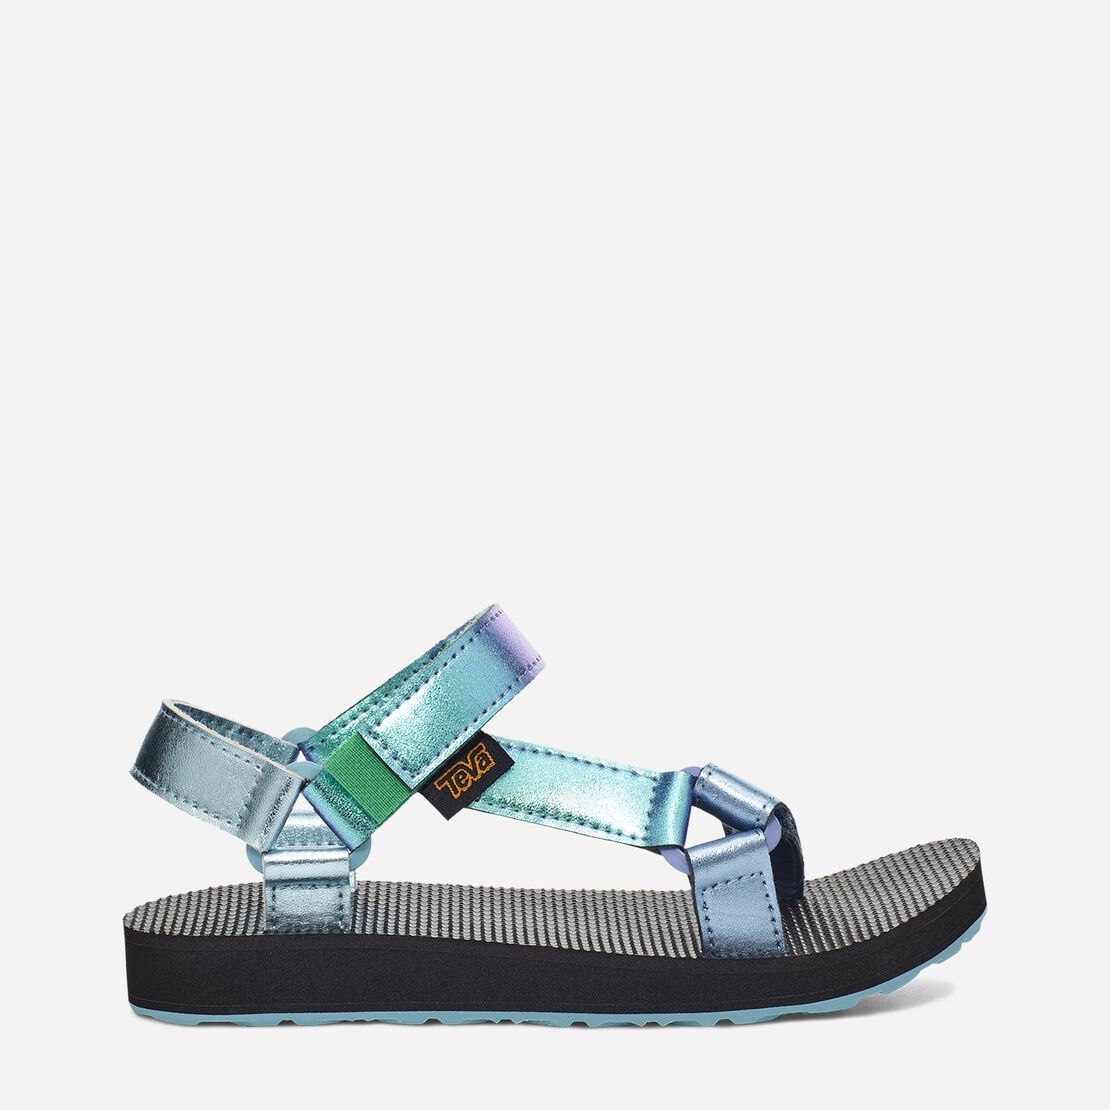 A tiny takedown from our main line, this high-shine remake packs a punch with color-blocked metallic leather straps. An earth-friendly kids’ sandal that’s ready to roam, the Original Universal Shimmer keeps leather out of landfills by utilizing reconstituted leather straps.